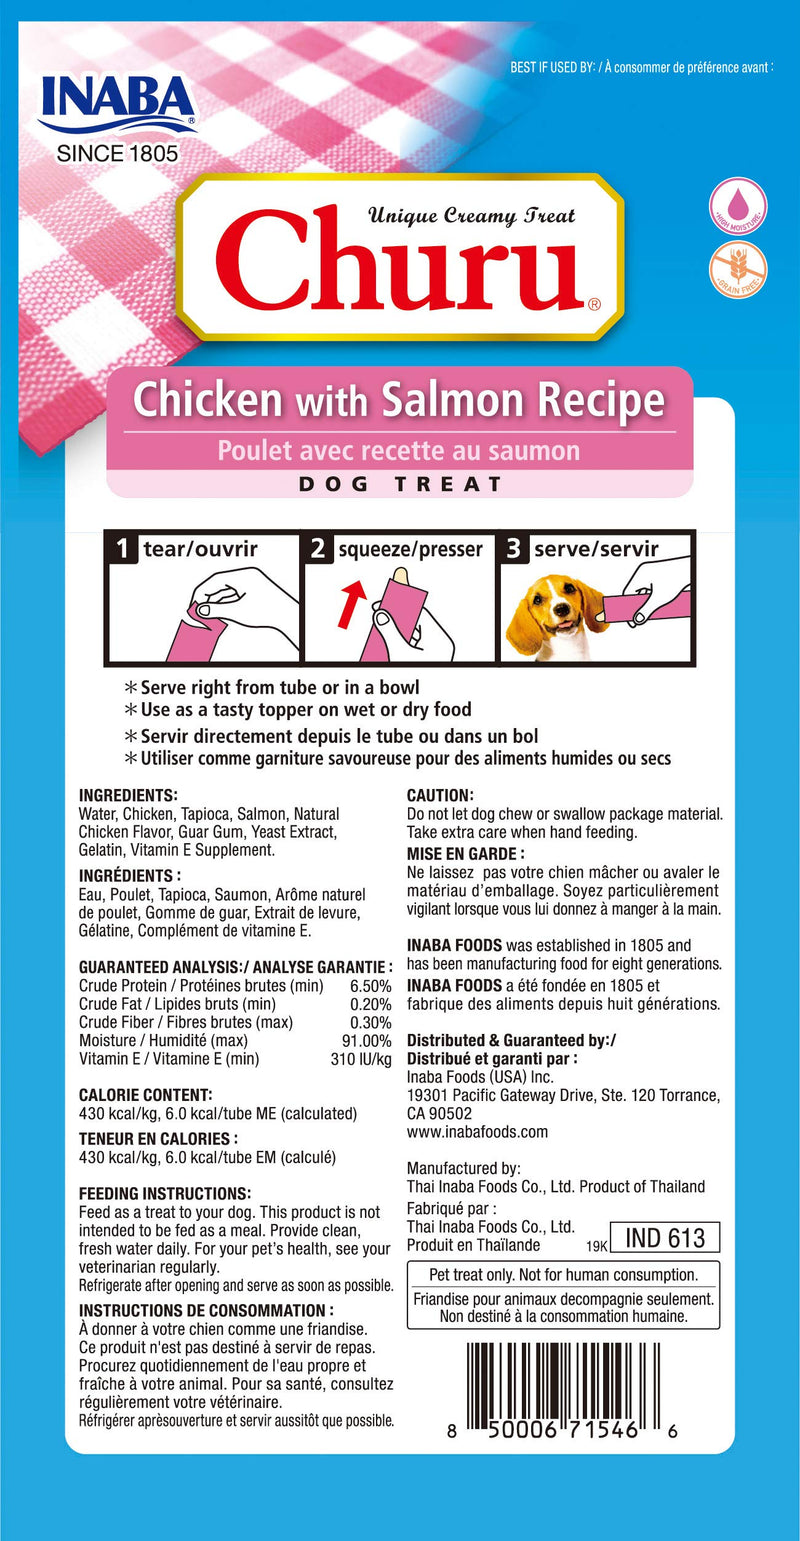 [Australia] - Churu Lickable Treat for Dogs - Chicken with Salmon Recipe 32 Tubes (8 Packs of 4 Tubes) 